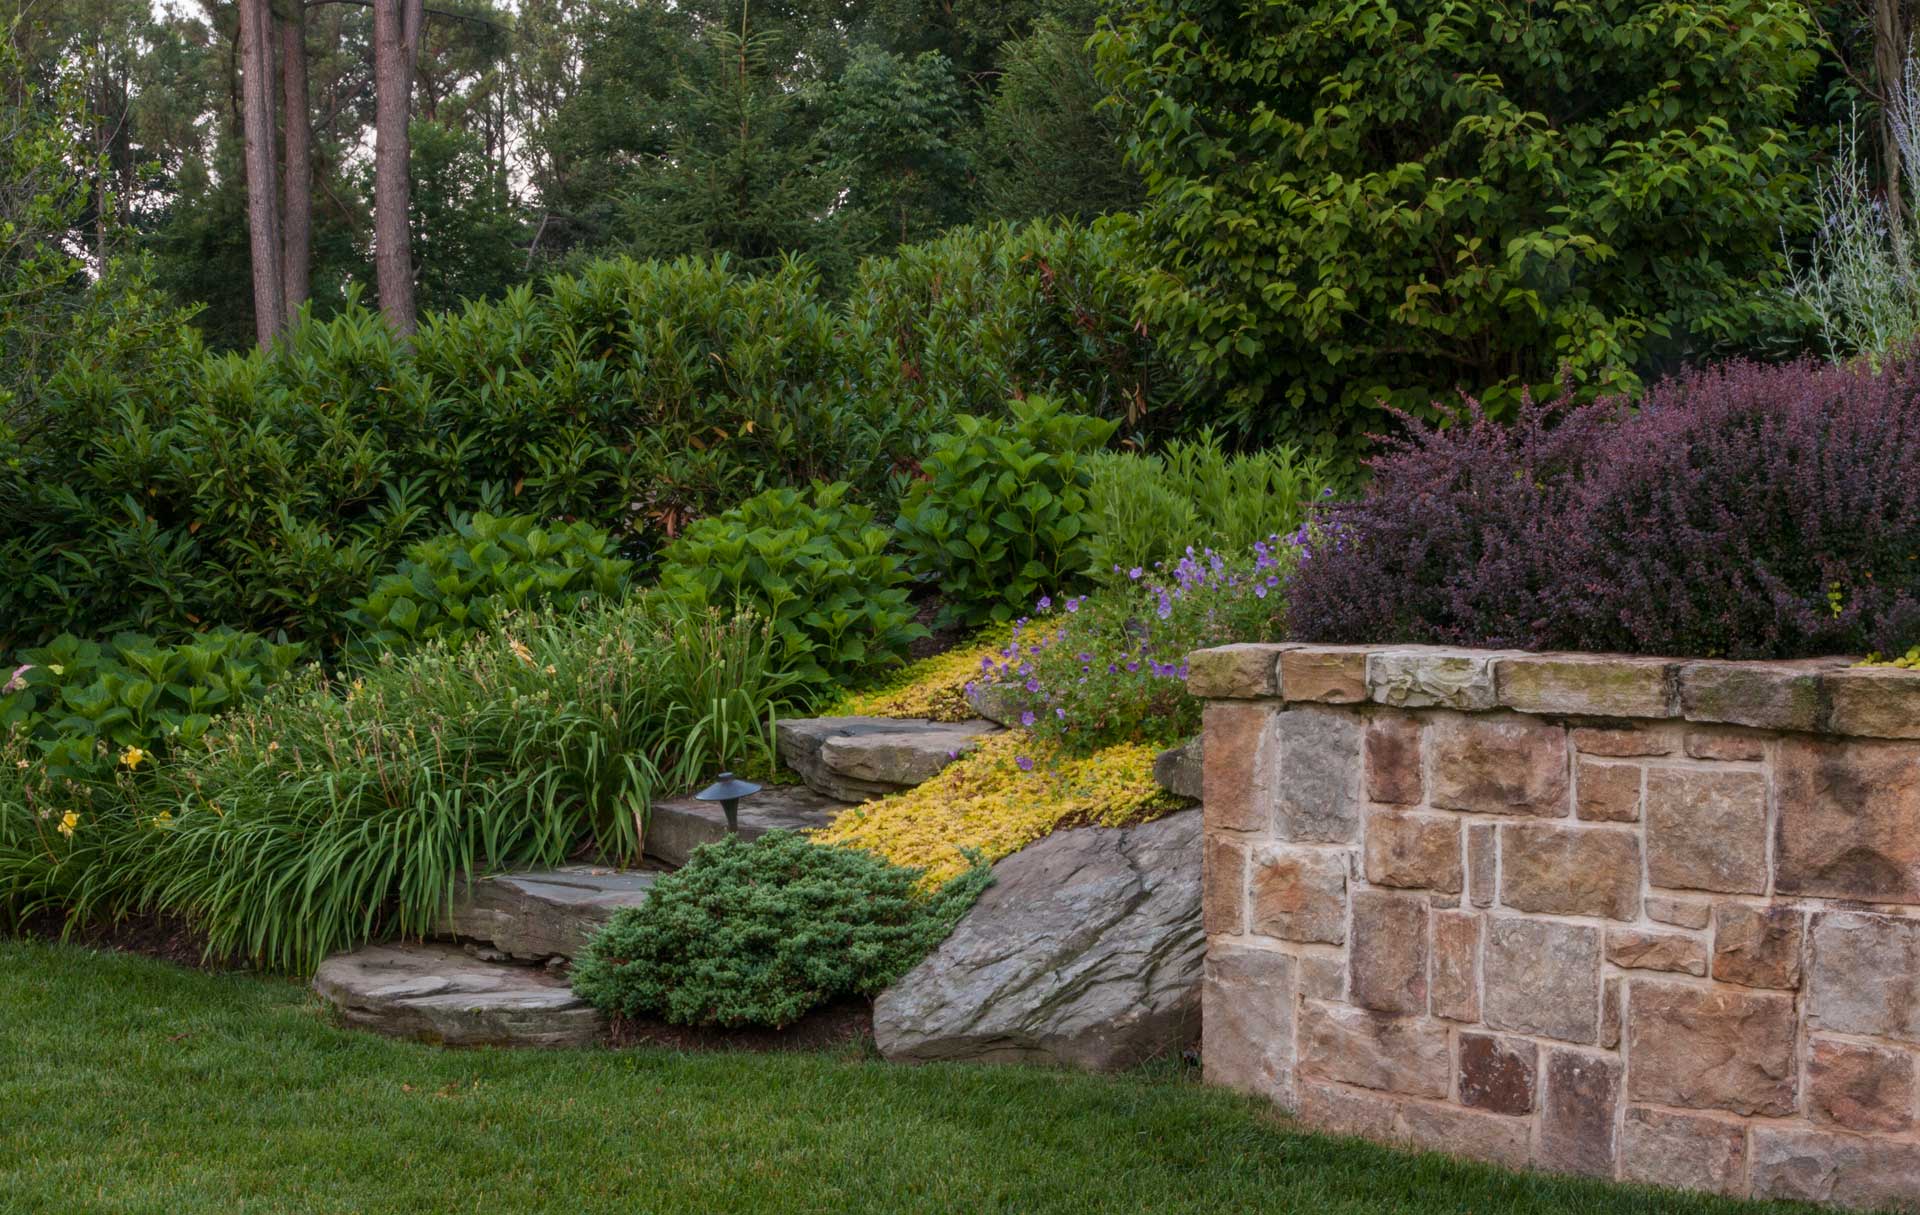 A picturesque stone retaining wall adorned with vibrant plants and flowers.